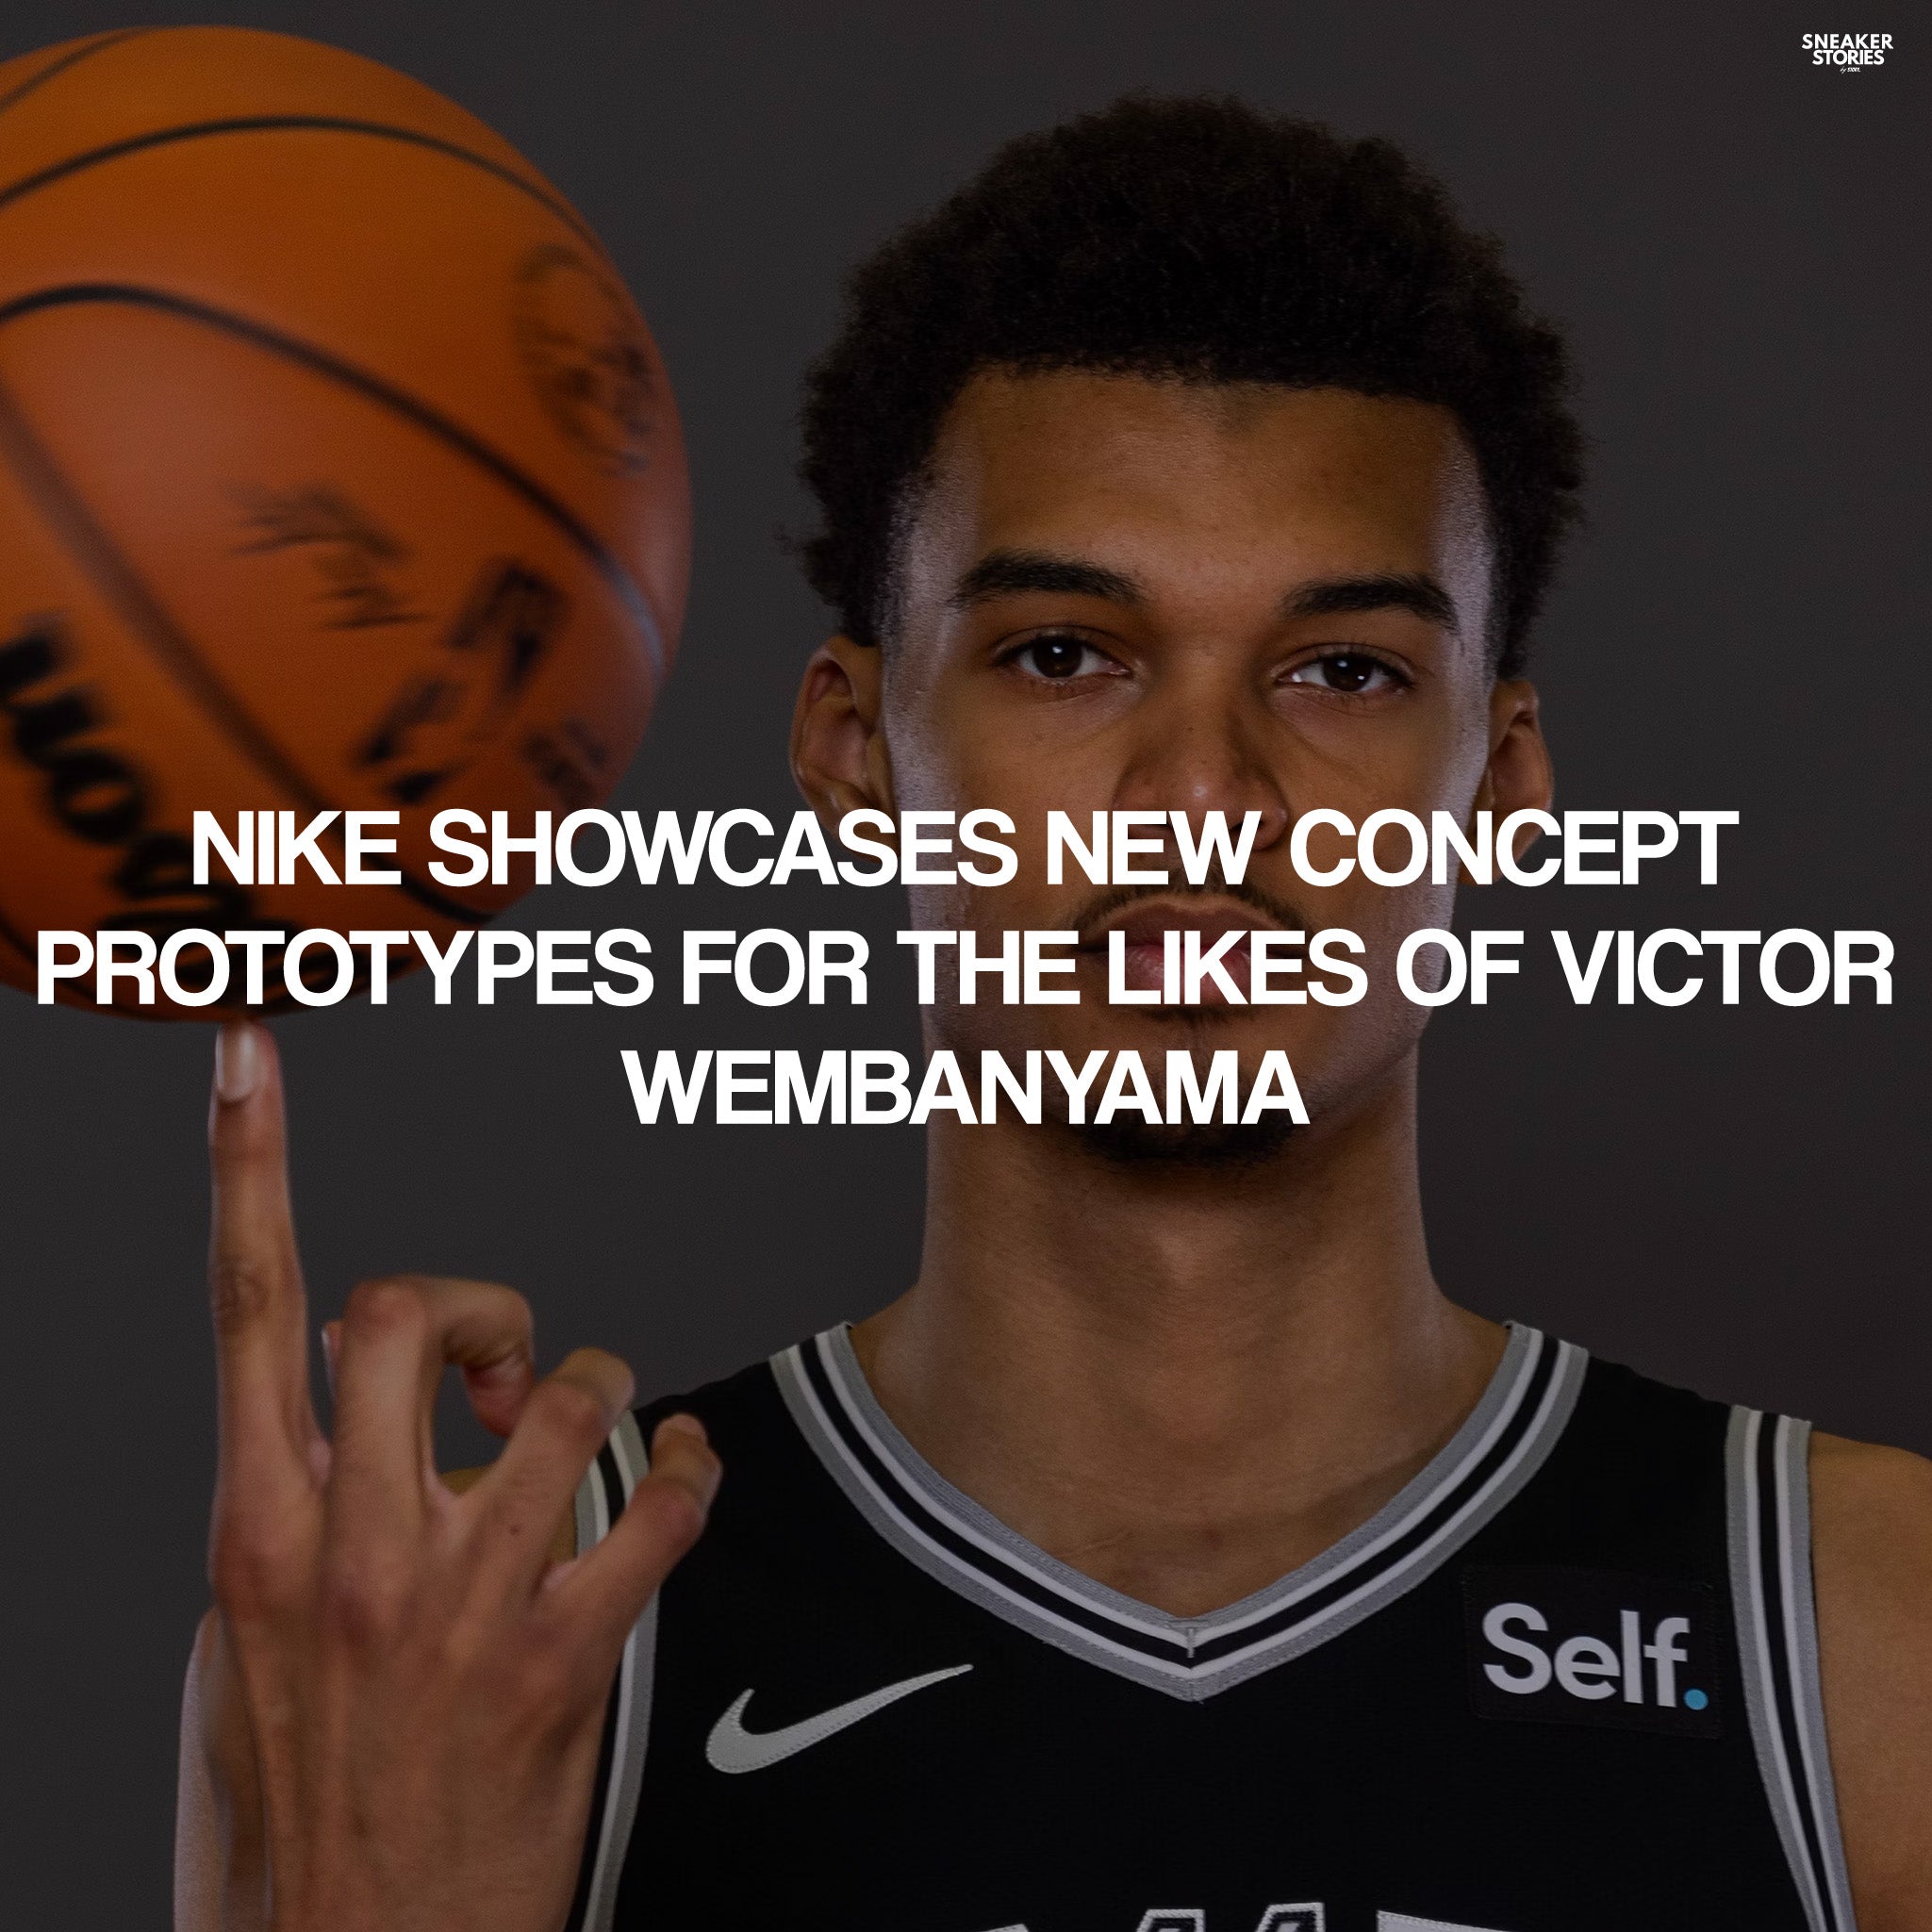 Nike showcases new concept prototypes for the likes of Victor Wembanyama